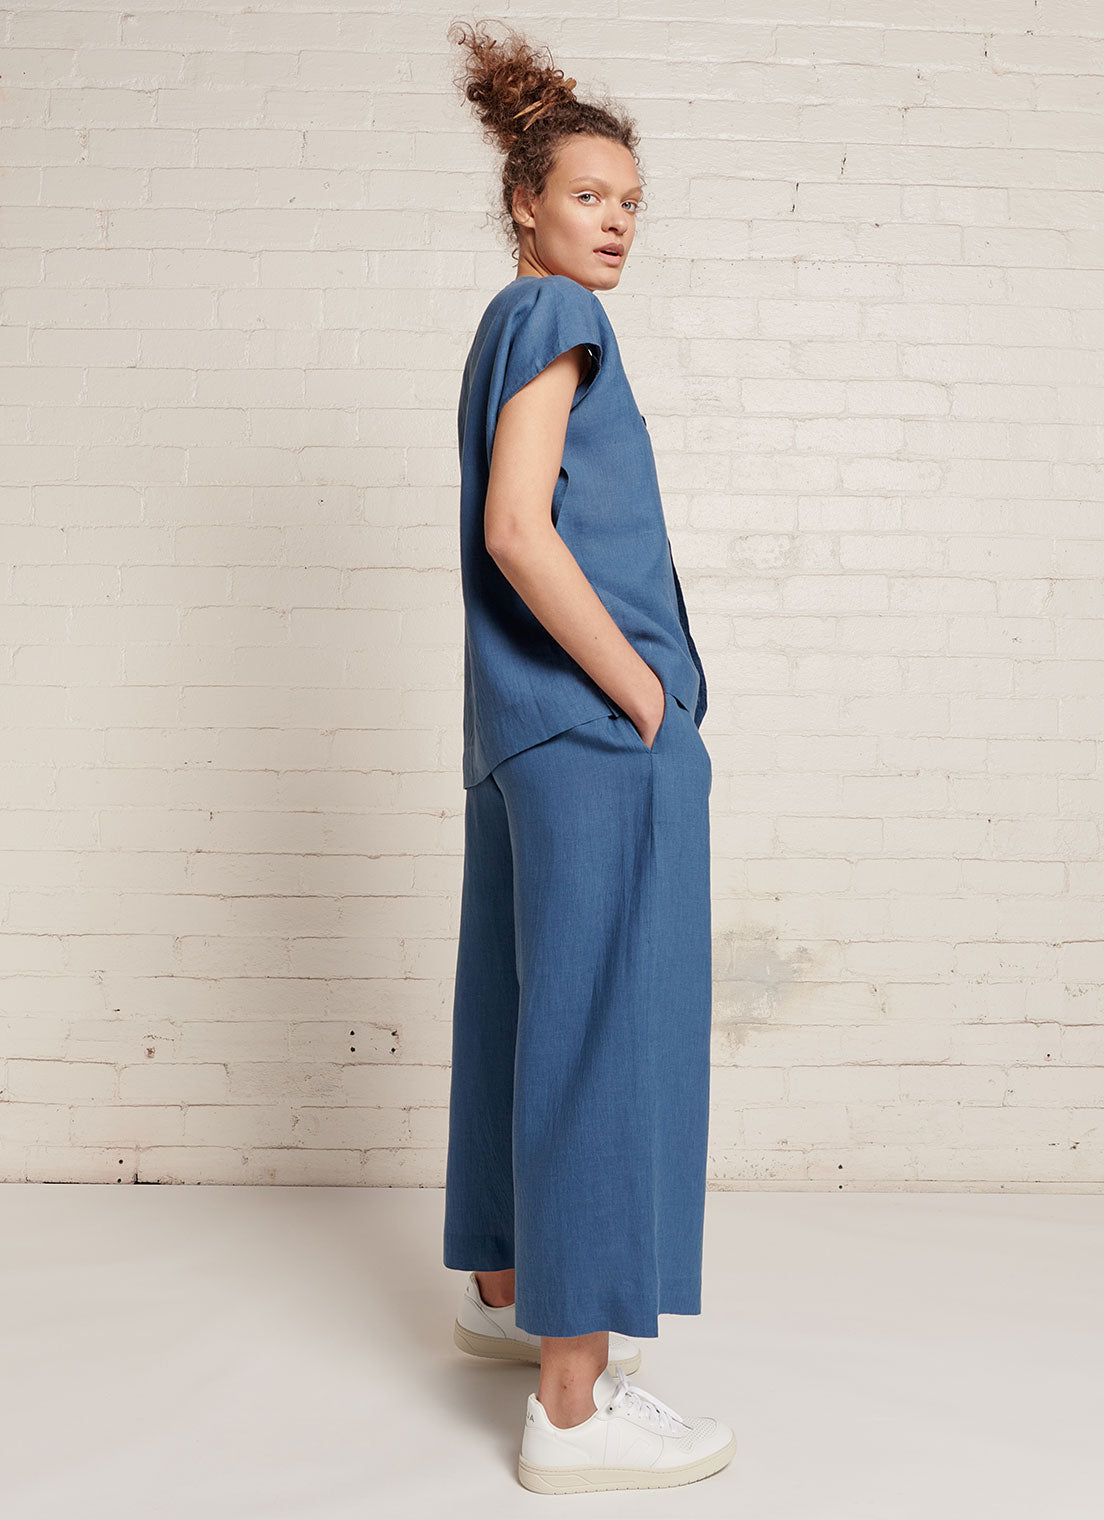 An indigo, loose fitting crop pants with elasticated waistband and tie belt of the same fabric made from yarn dye washed linen